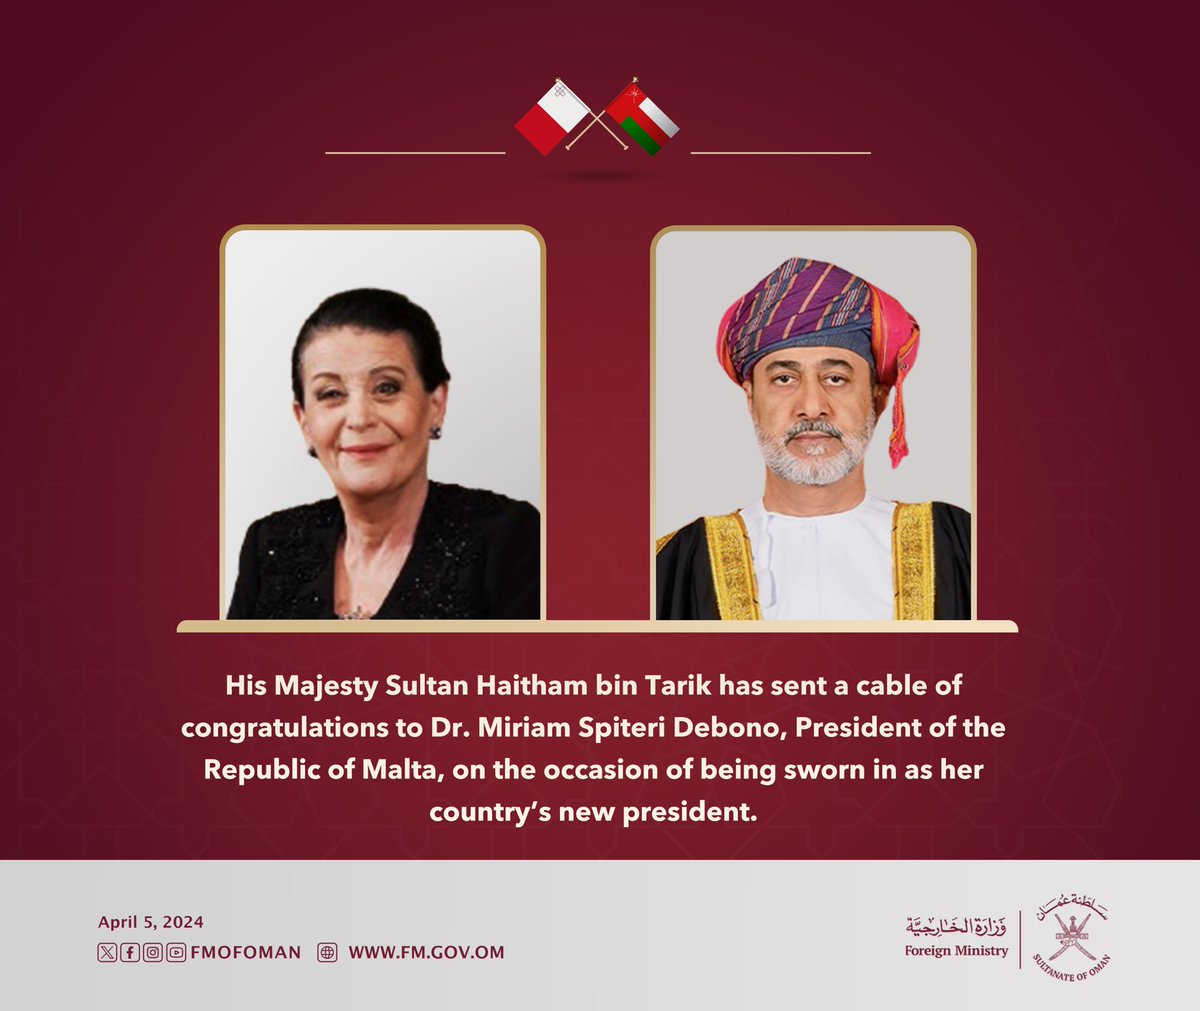 His Majesty the Sultan has sent a cable of congratulations to Dr. Miriam Spiteri Debono, President of the Republic of #Malta, on the occasion of being sworn in as her country’s new president.